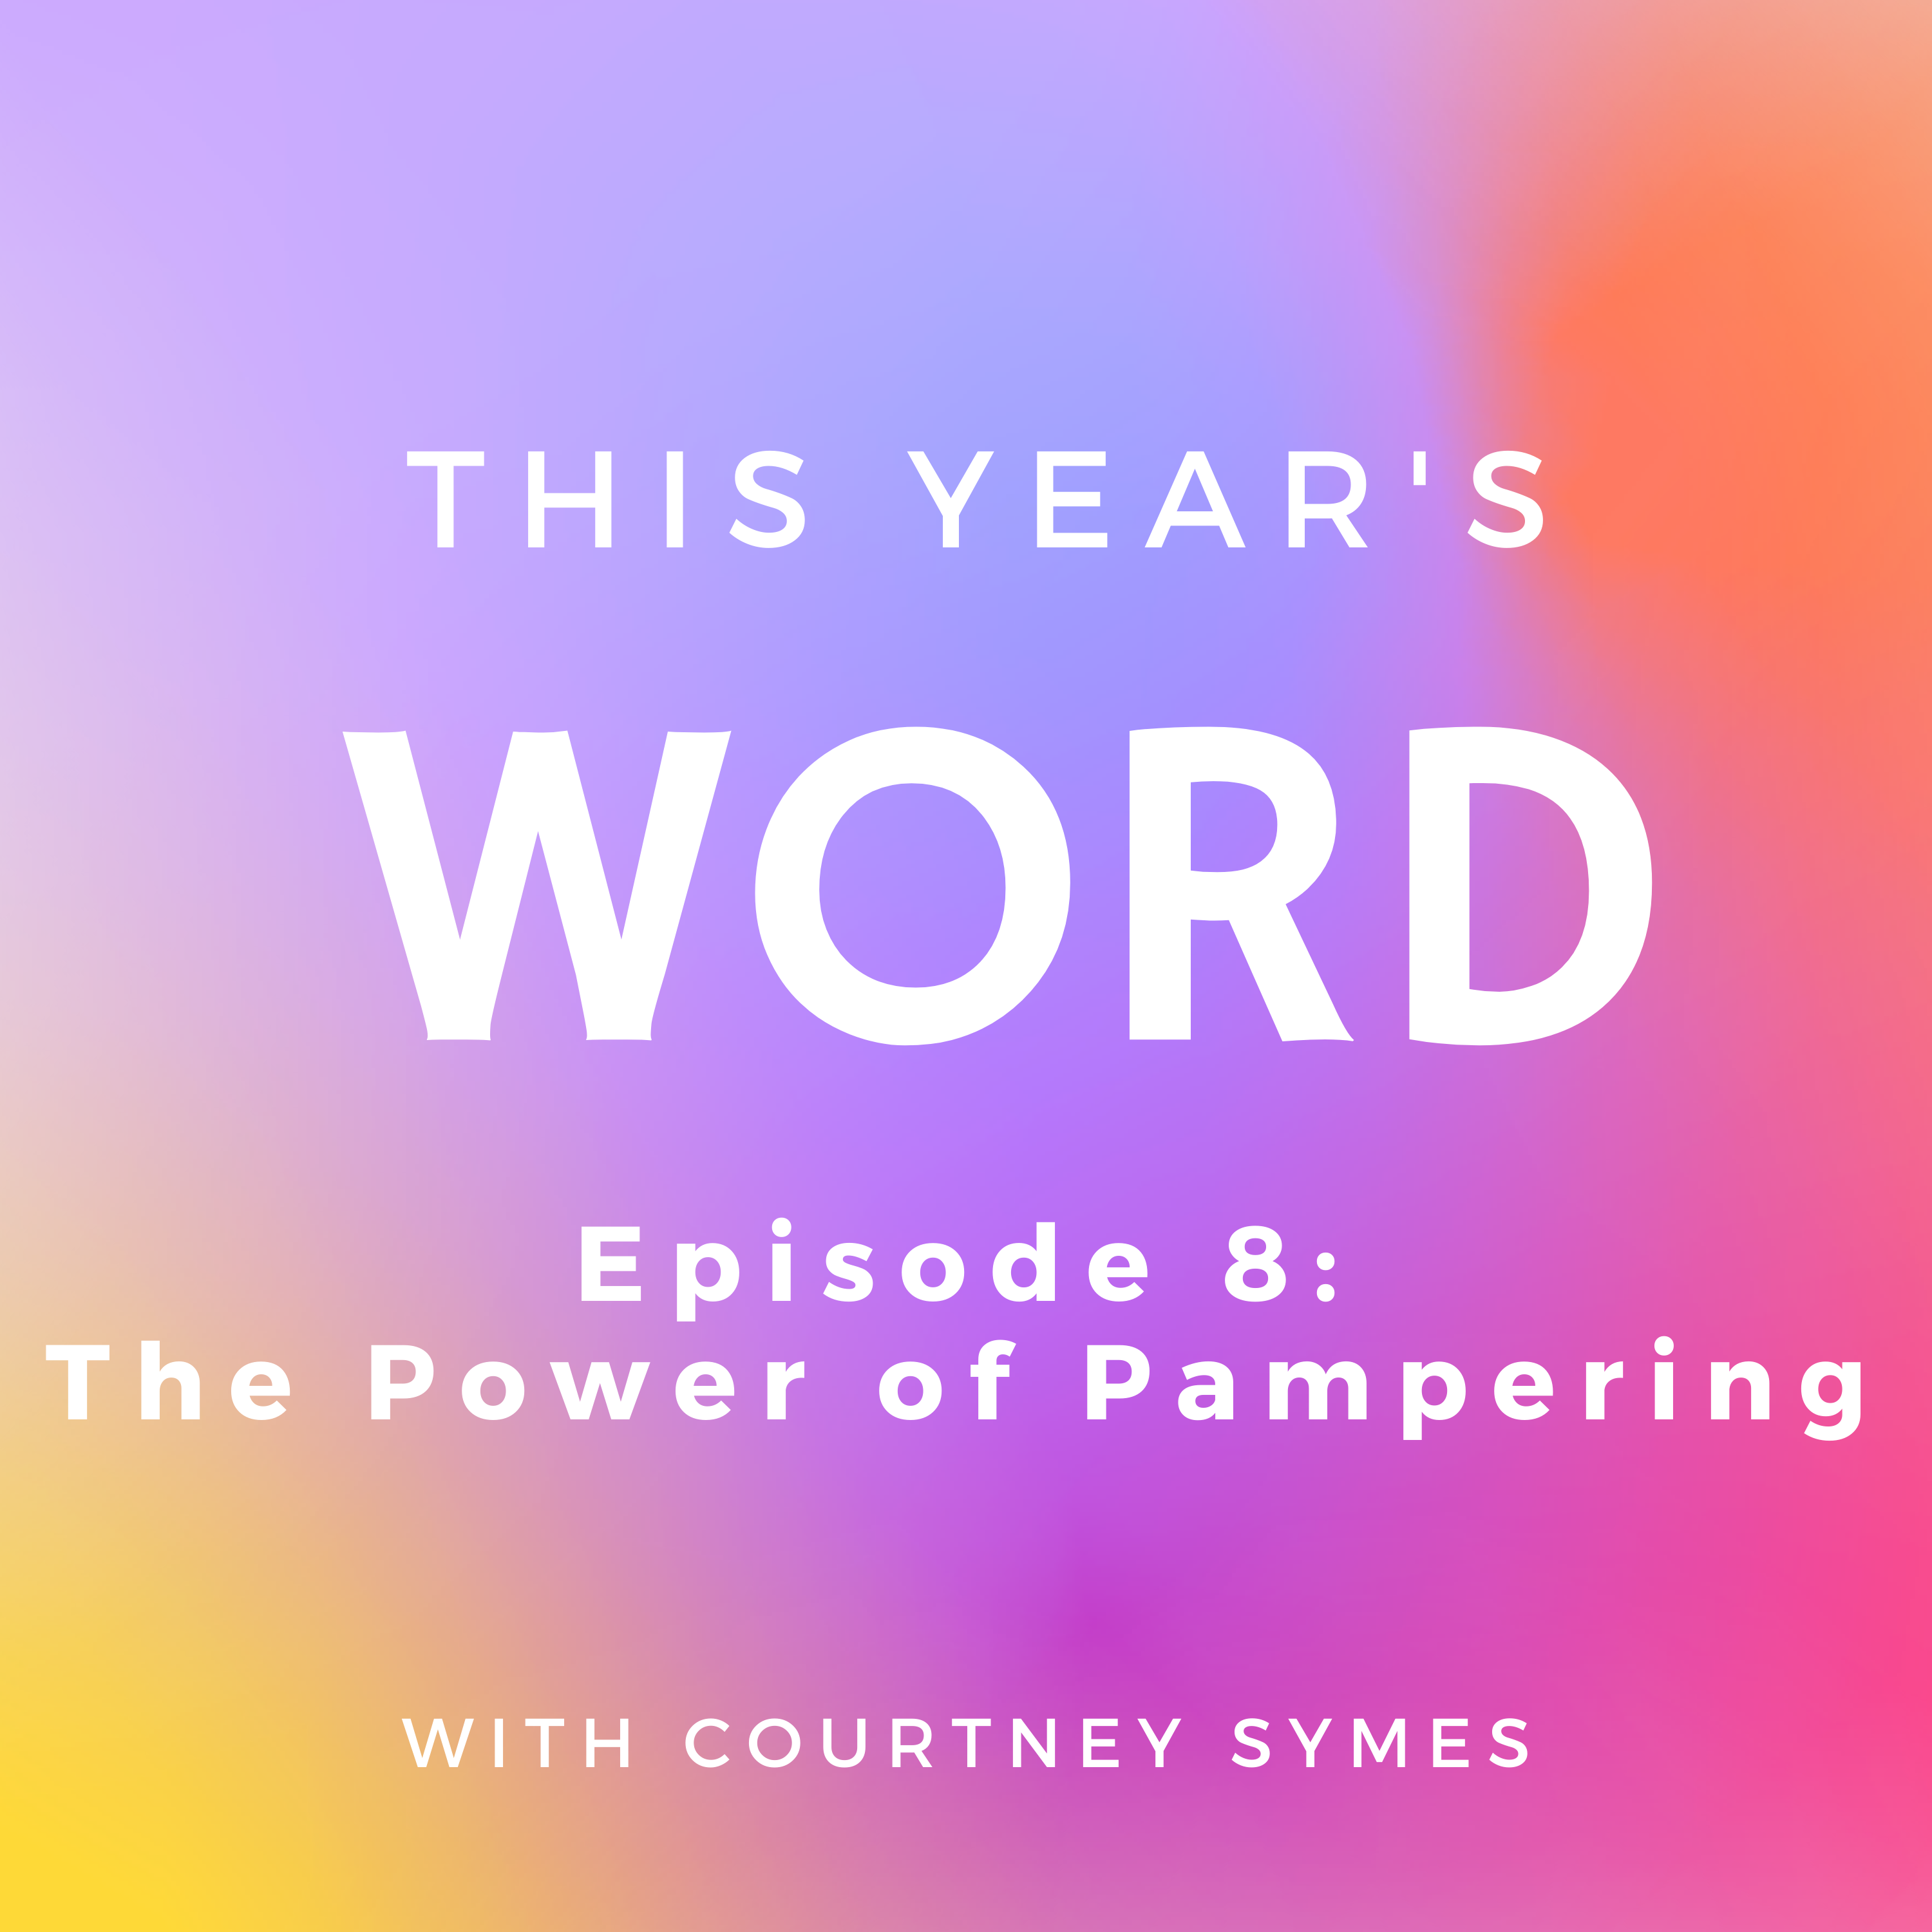 This Year’s Word Podcast Shownotes: Episode 8, The Power of Pampering